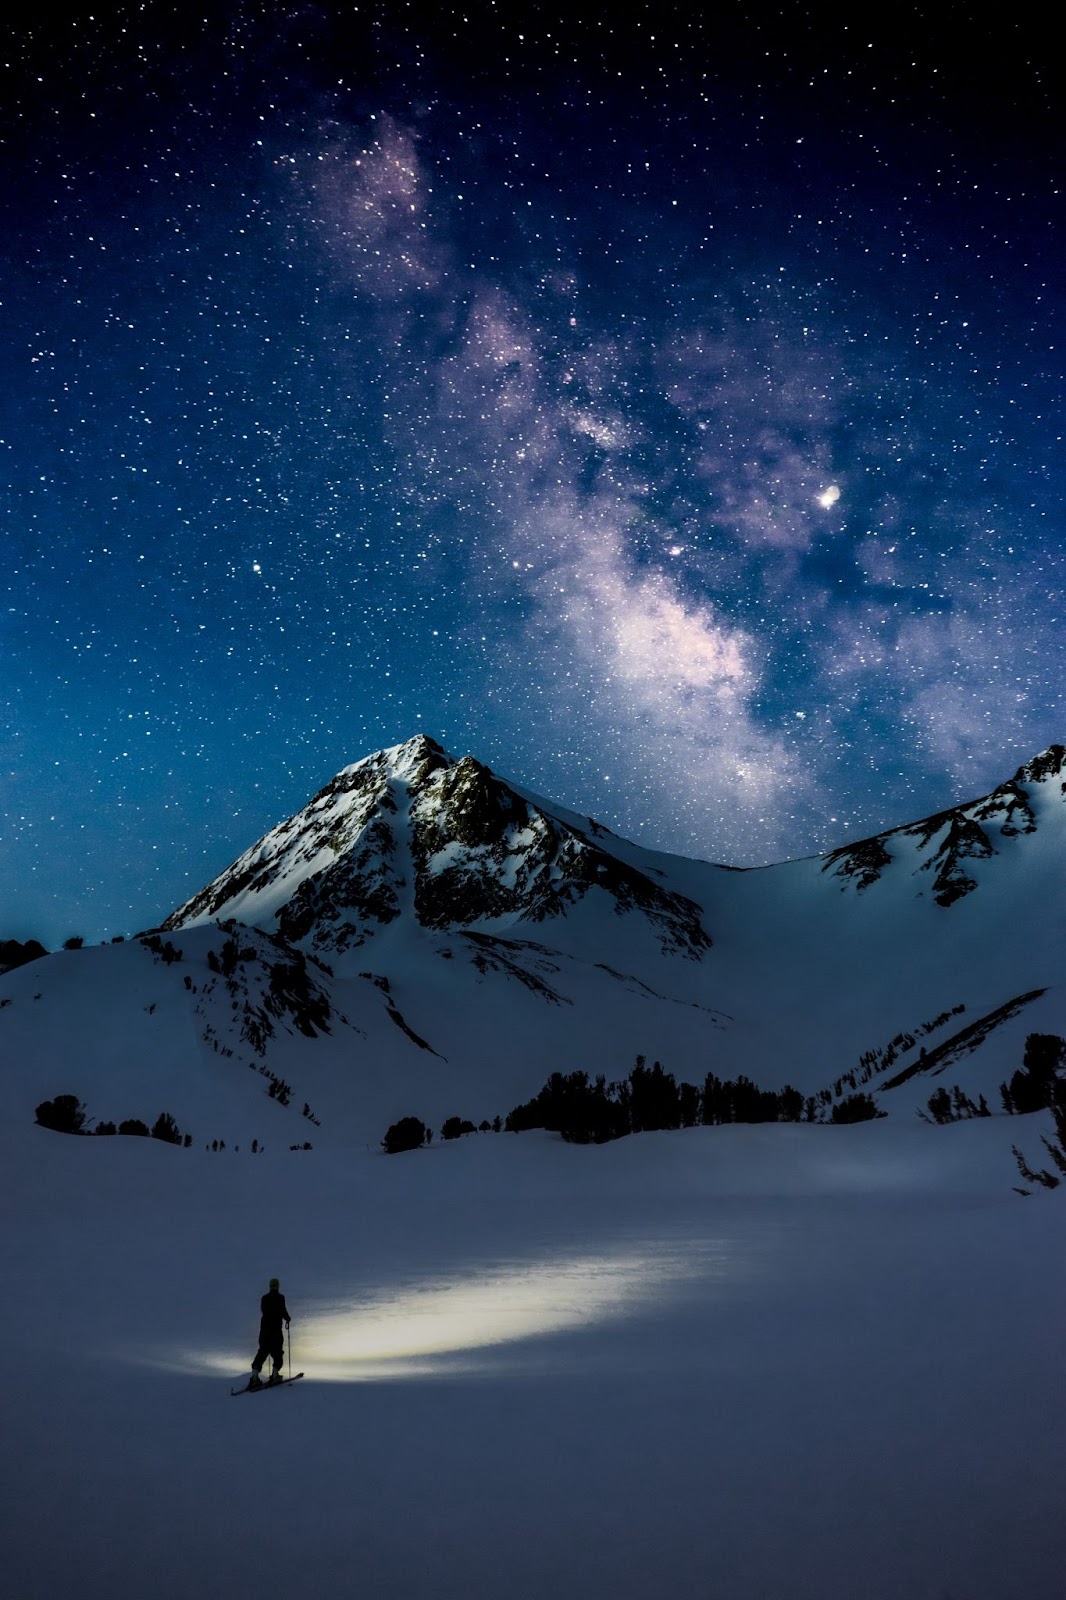 Mountains and the Milky Way